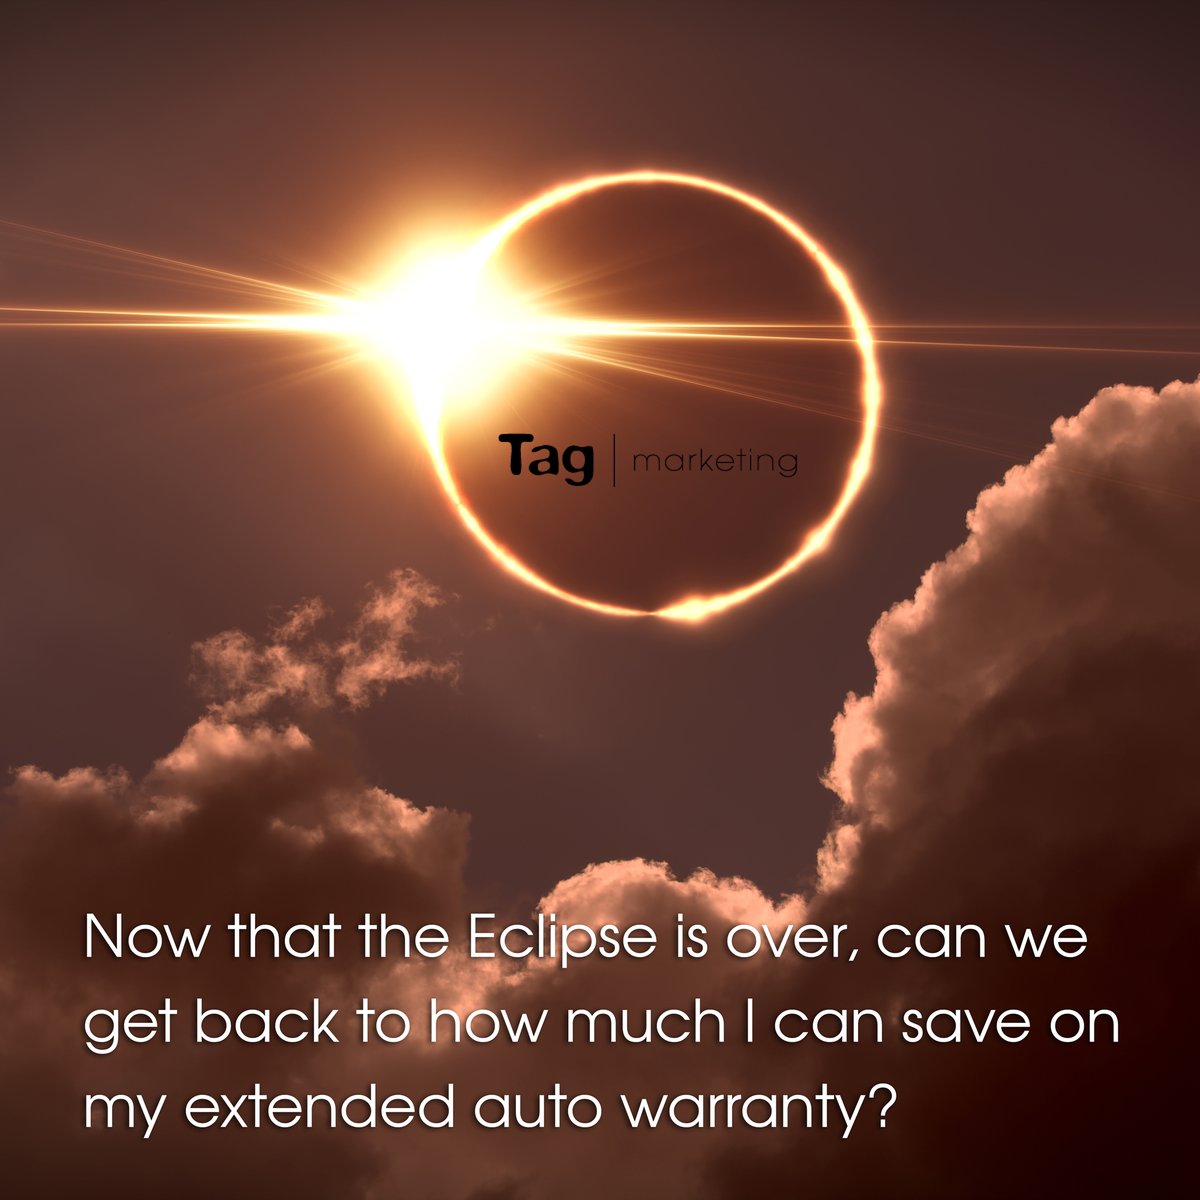 Now that the Eclipse is over, can we get back to how much I can save on my extended auto warranty?

#eclipse2024 #fulleclipse #tagmarketing